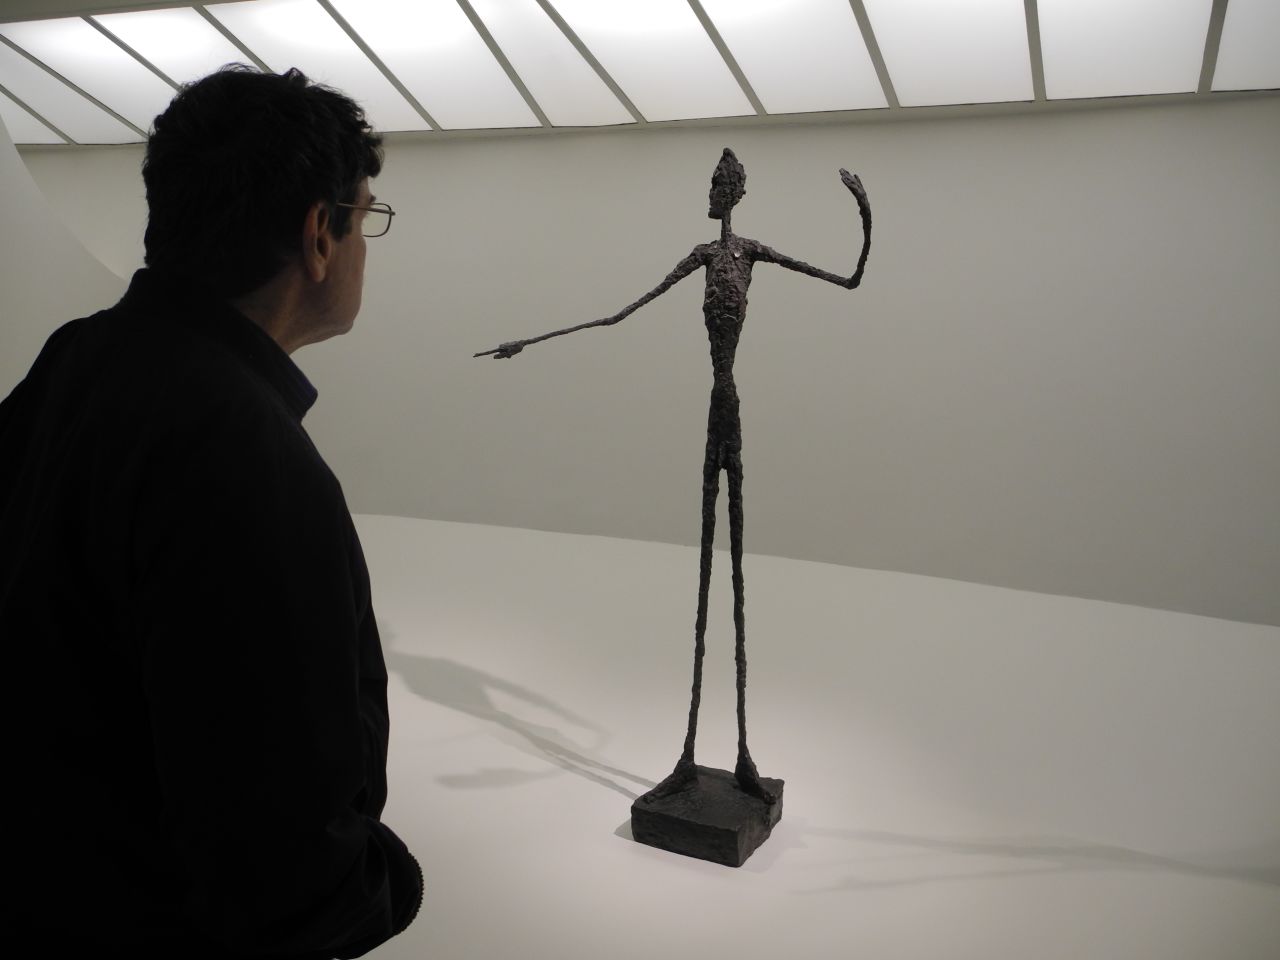 In 2018, the Guggenheim in New York held a retrospective of Giacometti's career with nearly 200 works of art. 